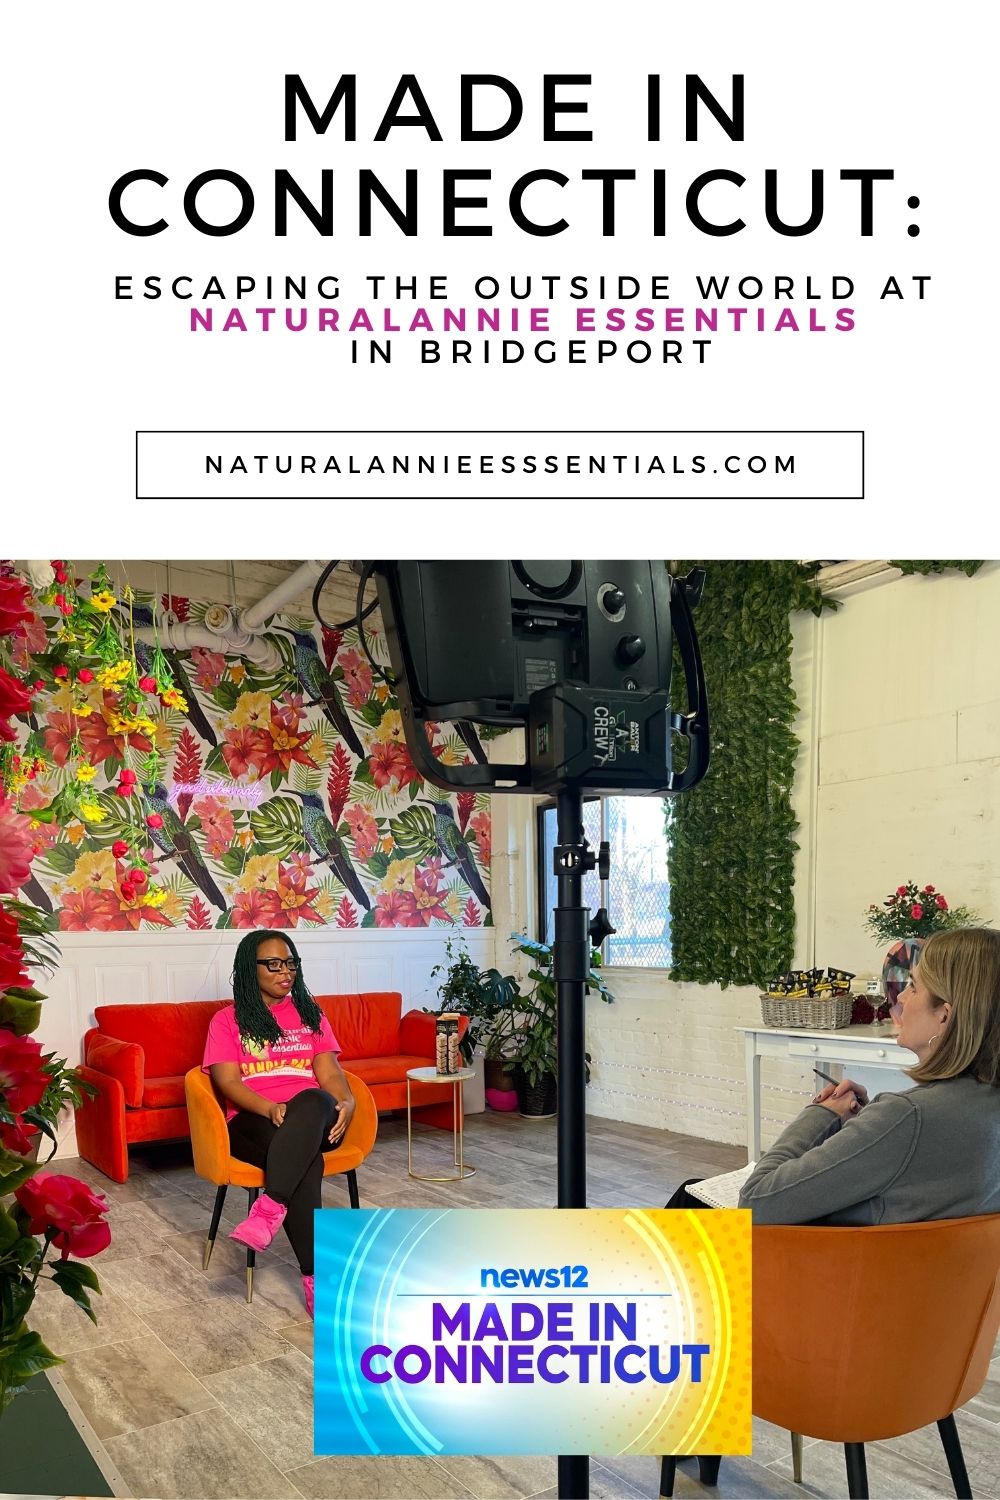 Made In Connecticut: Escaping the outside world at NaturalAnnie Essentials in Bridgeport